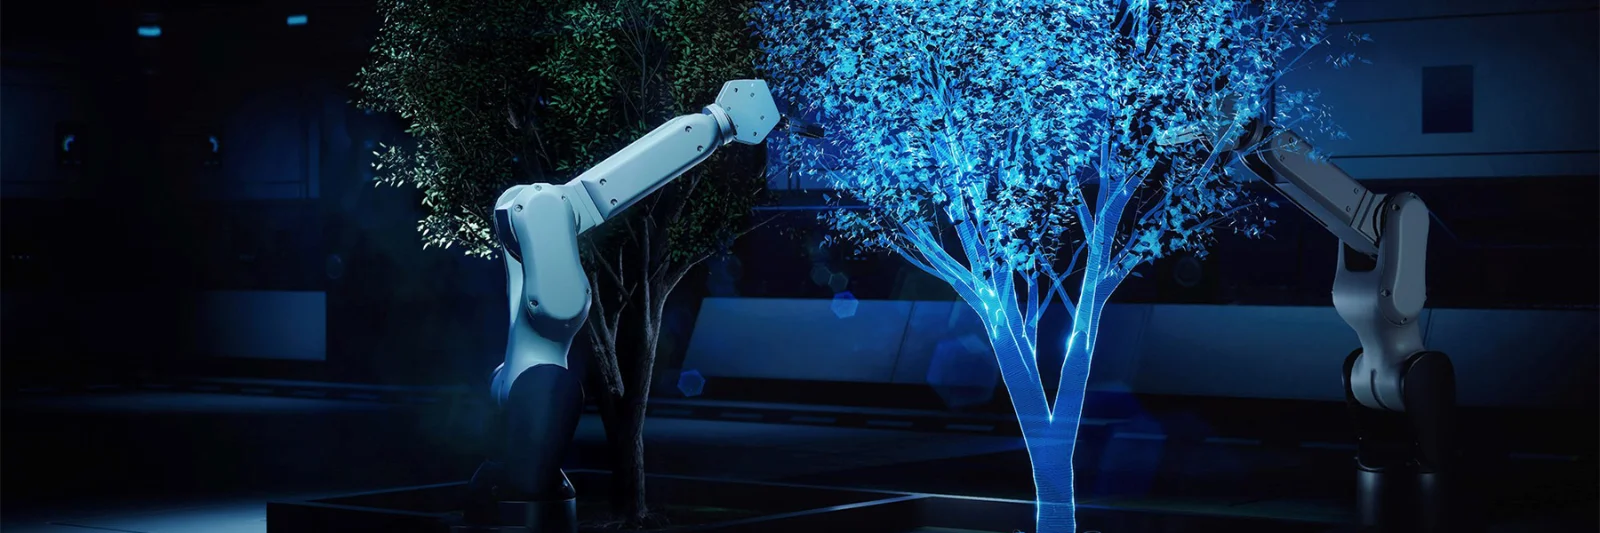 The image depicts two robotic arms interacting with a digital tree, symbolizing the seamless integration of technology and nature in the Sphinx Open project. The digital tree glows with a vibrant blue hue, representing the growth and innovation fostered by the project. The juxtaposition of the physical and digital elements highlights the advanced technological solutions and the innovative approach of Sphinx Open. This visual representation underscores the project&#039;s focus on cutting-edge technology, sustainable development, and the future of digital transformation. The futuristic setting and lighting emphasize the high-tech and forward-thinking nature of Sphinx Open.